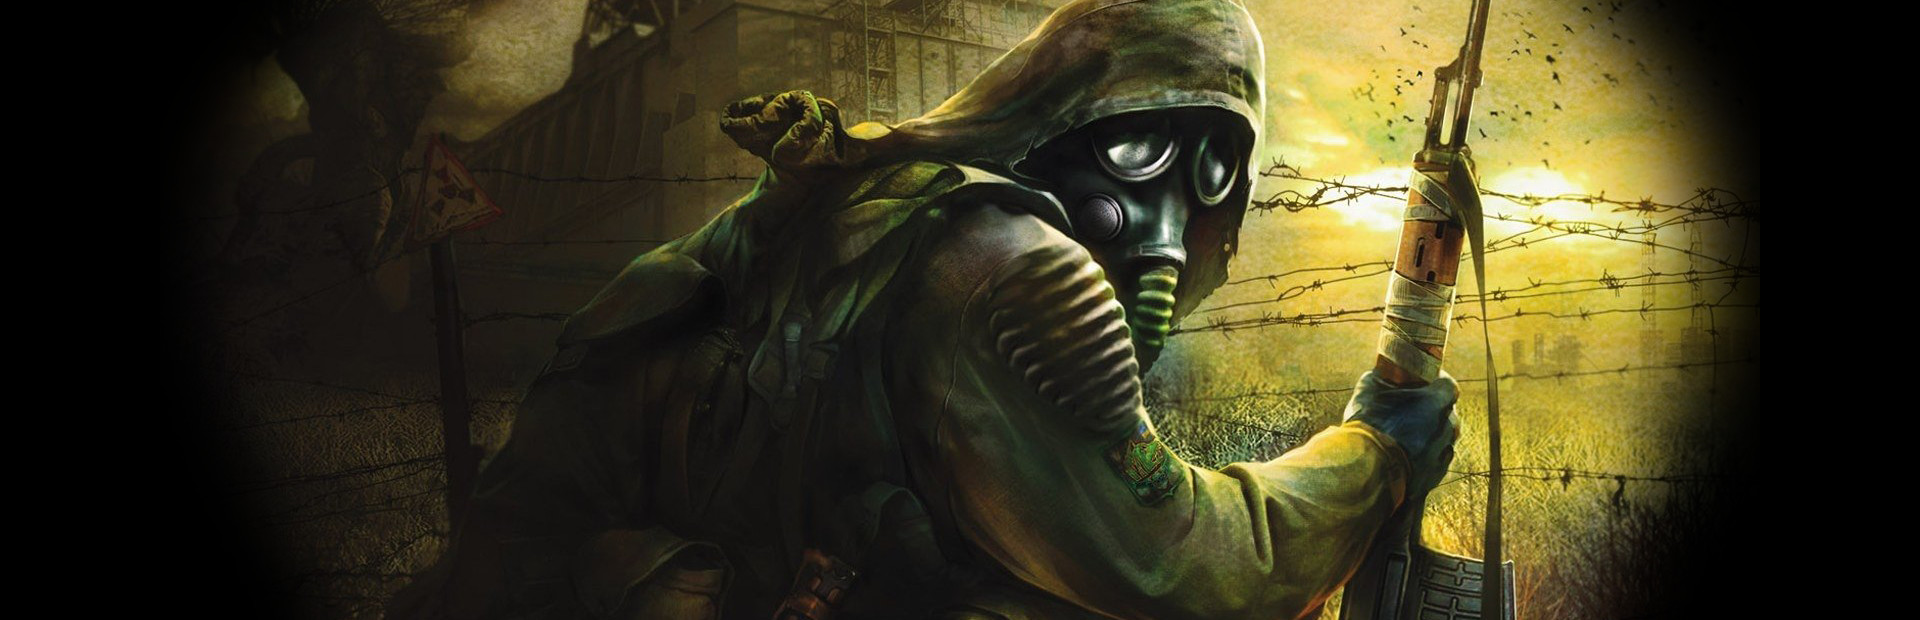 S.T.A.L.K.E.R.: Shadow of Chernobyl cover image